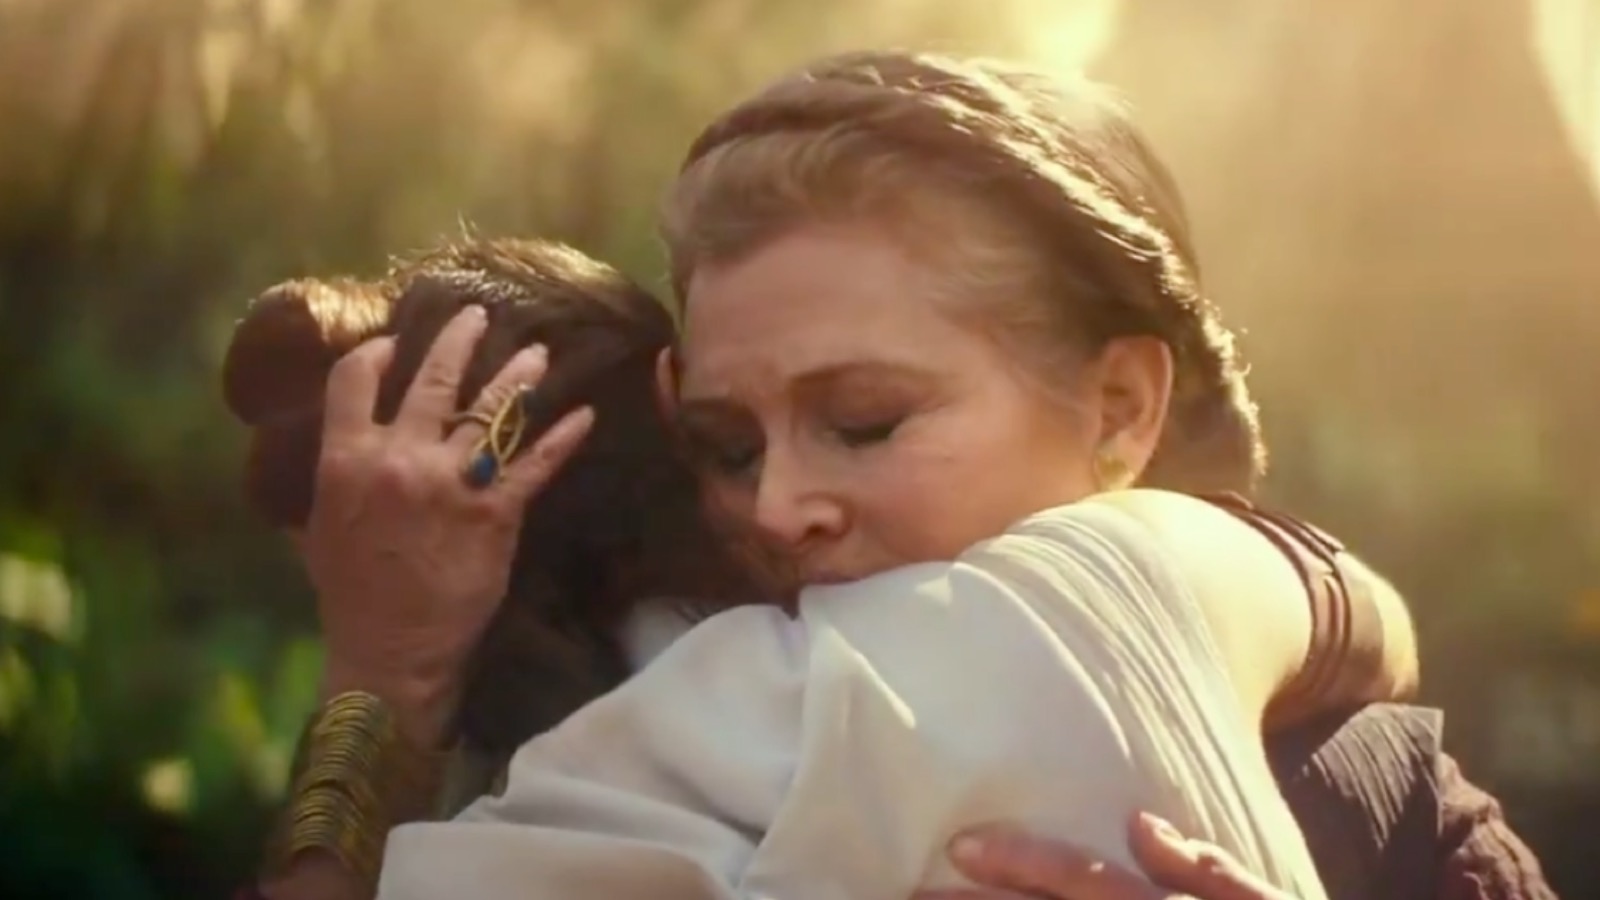 The Final Trailer For "The Rise of Skywalker" Is Here And It Is Epic